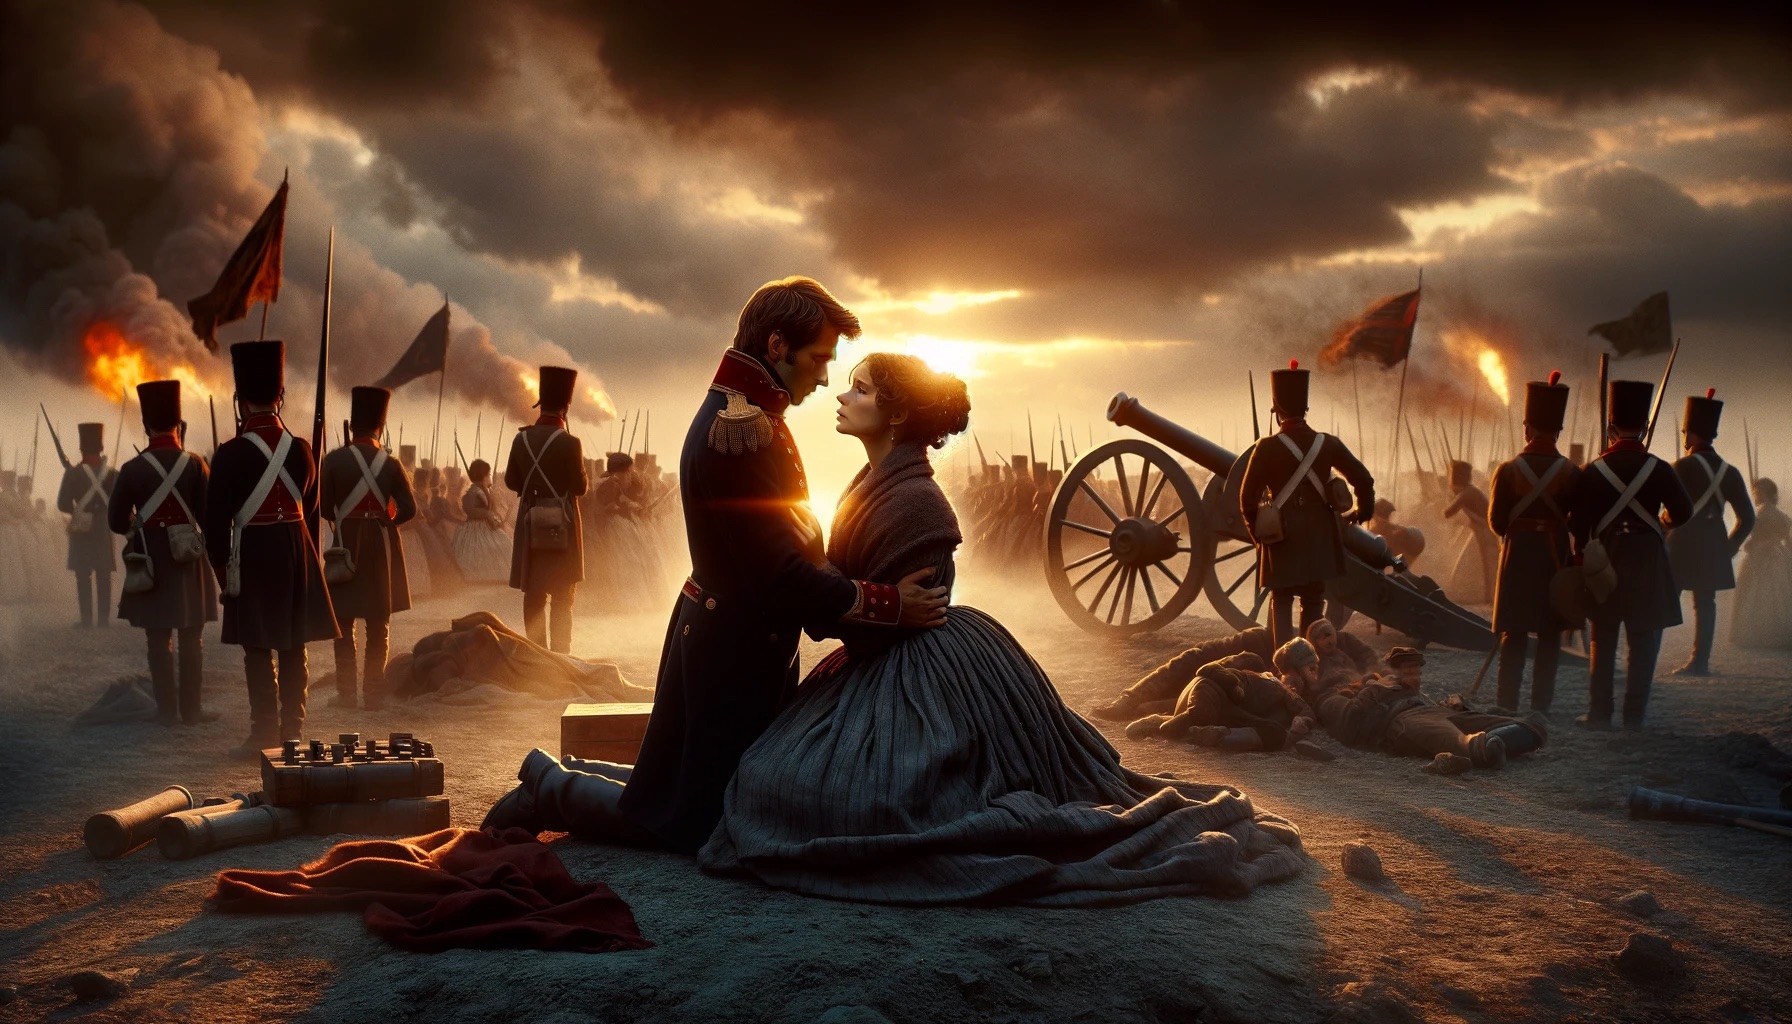 Stand! Unveils Love And Struggle In An Epic Historical Drama